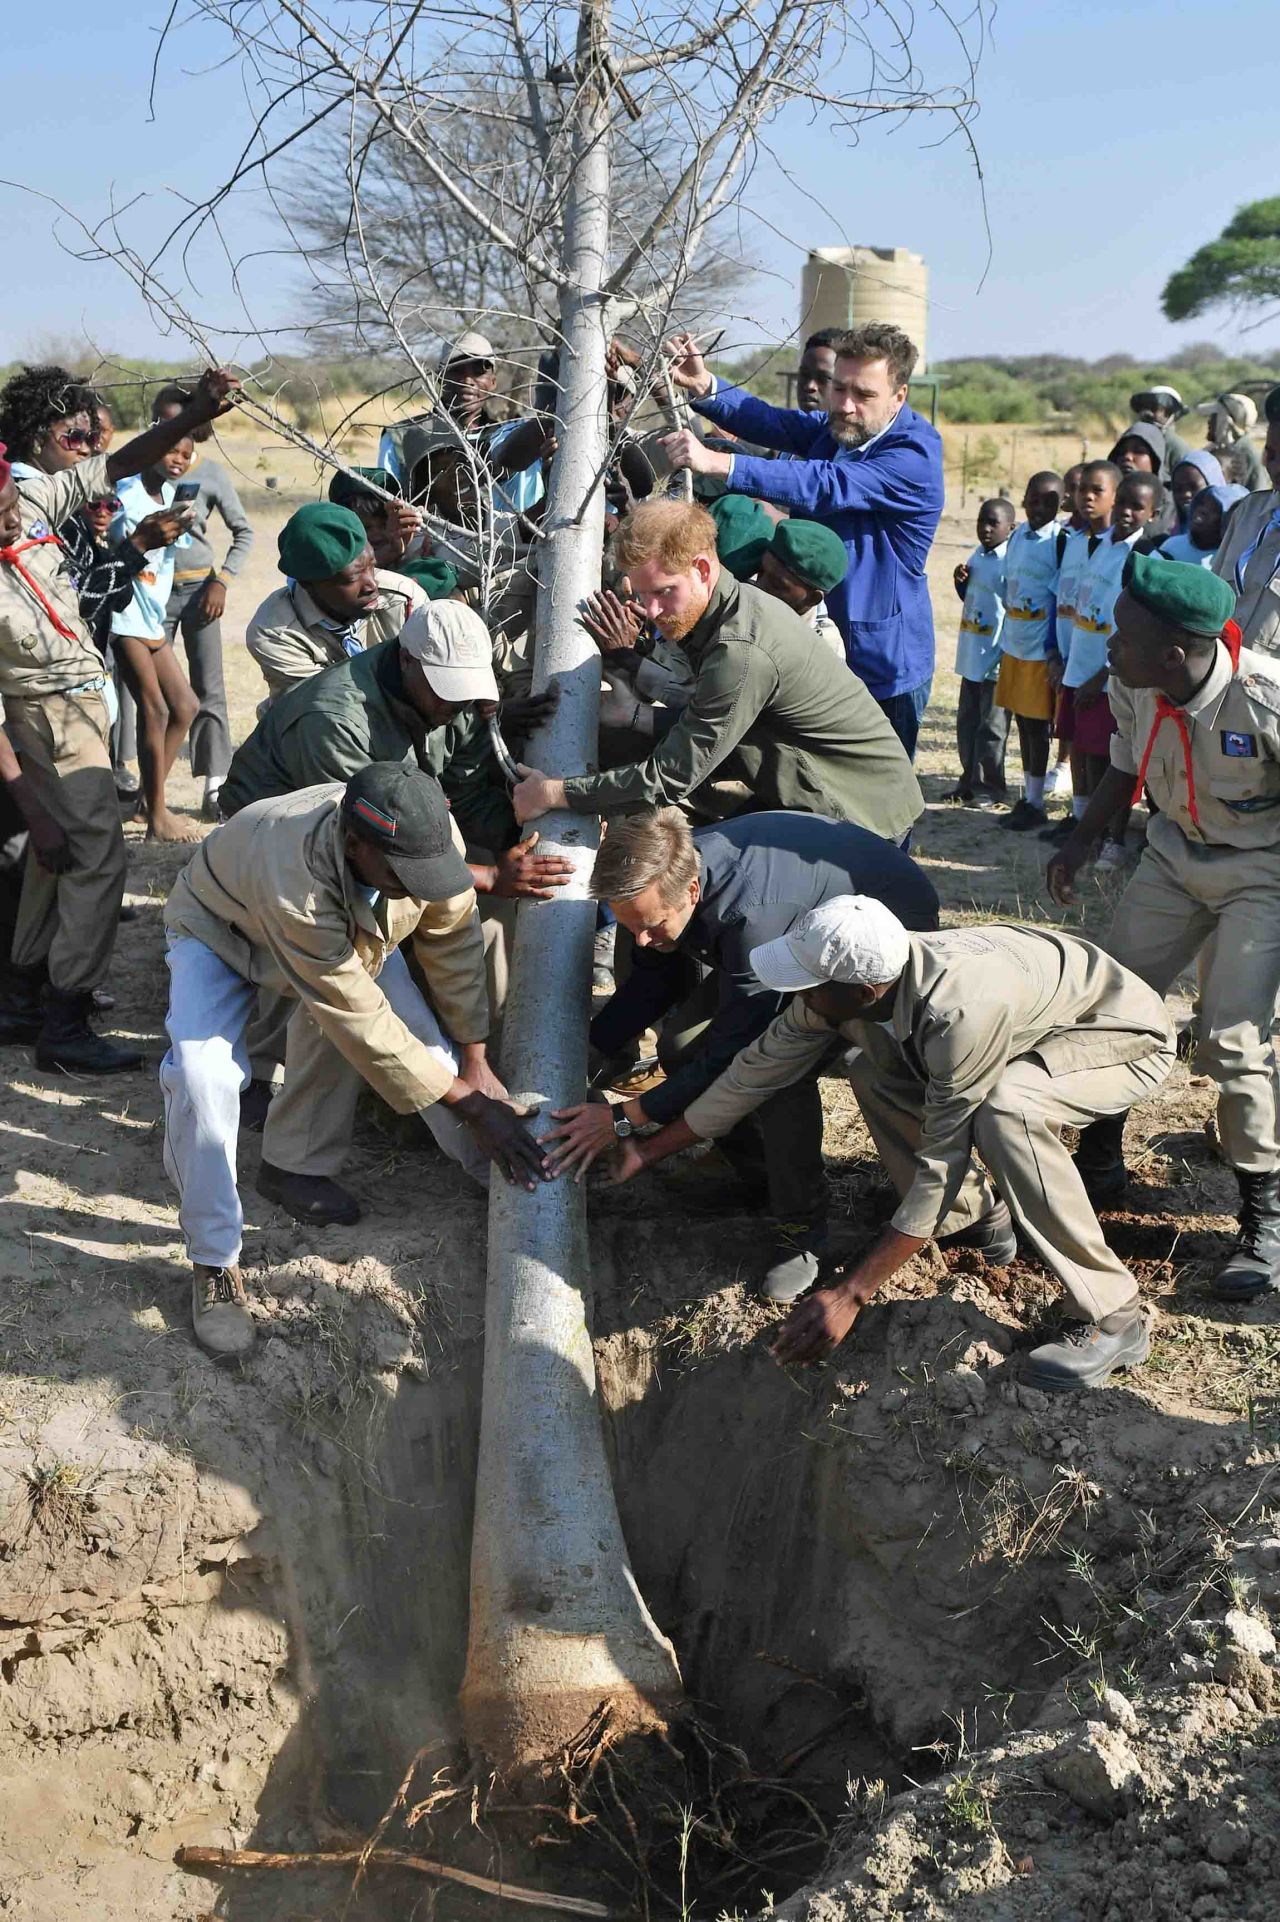 Harry helps to plant a tree at the Chobe Tree Reserve in Botswana on September 26. In an <a href="https://edition.cnn.com/2019/09/26/africa/prince-harry-climate-change-botswana-intl-gbr/index.html" target="_blank">interview with CNN along the banks of the Chobe River,</a> Harry expressed support for ongoing global climate strikes: "The world's children are striking. It is an emergency, a race against time and one in which we are losing."